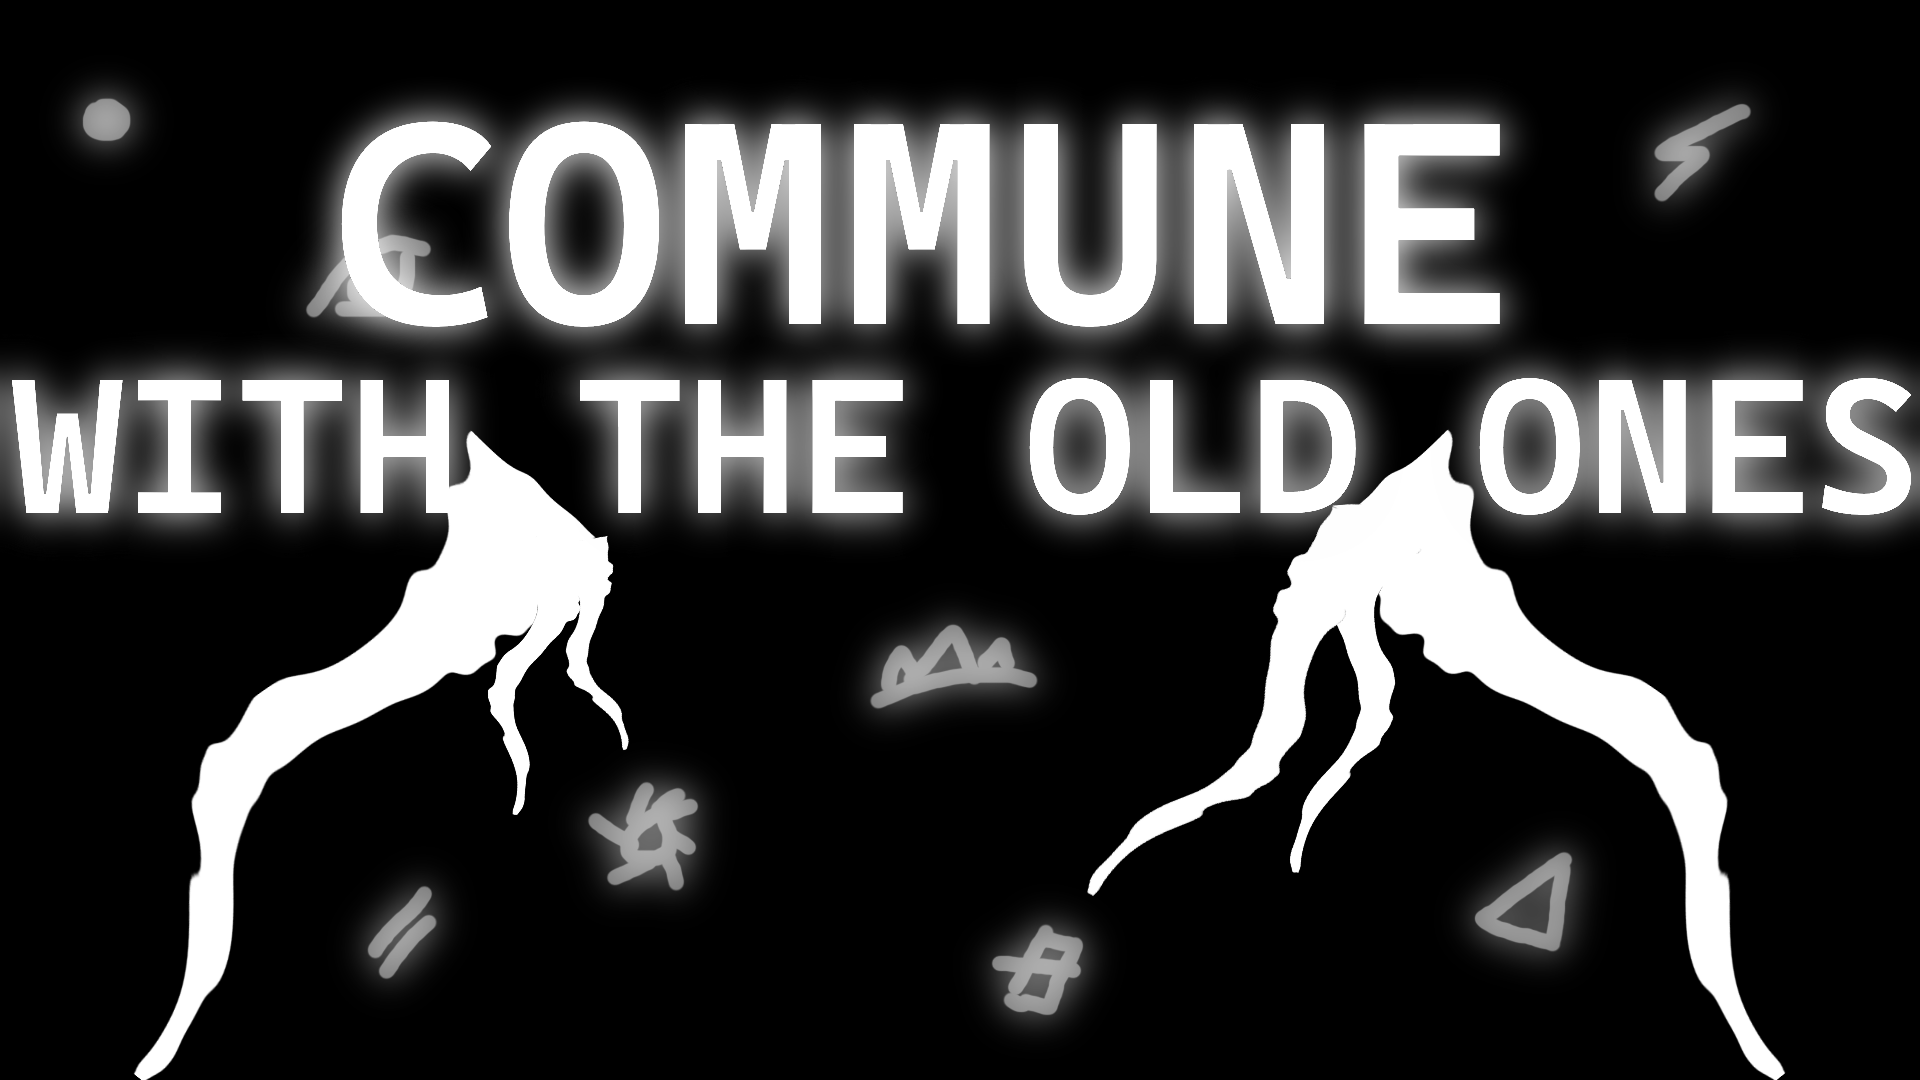 Commune with the old ones